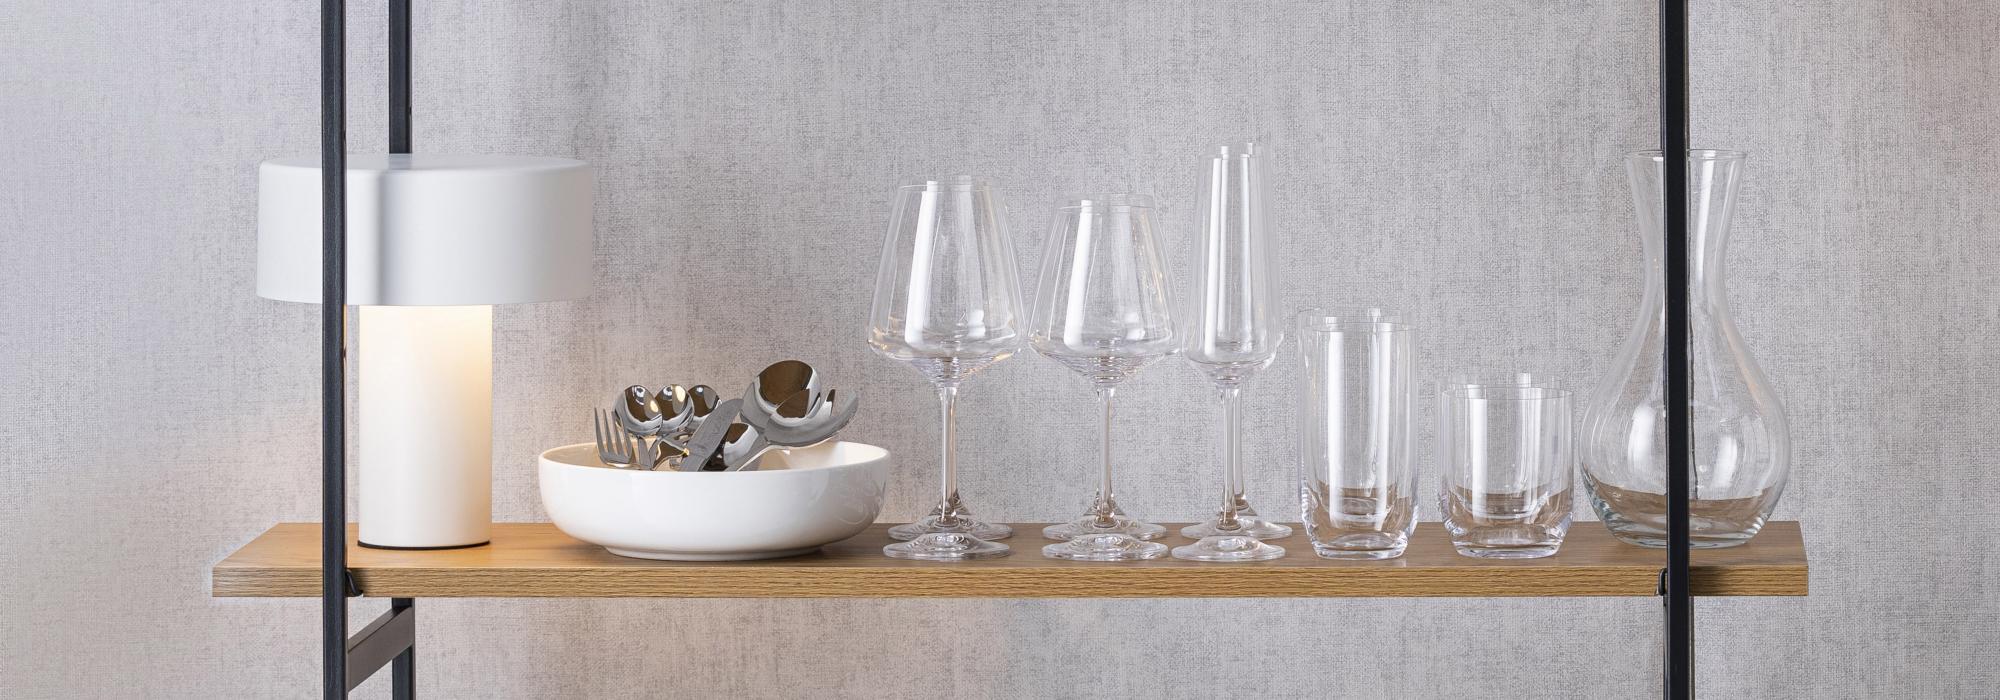 About MOODS tableware glassware collection